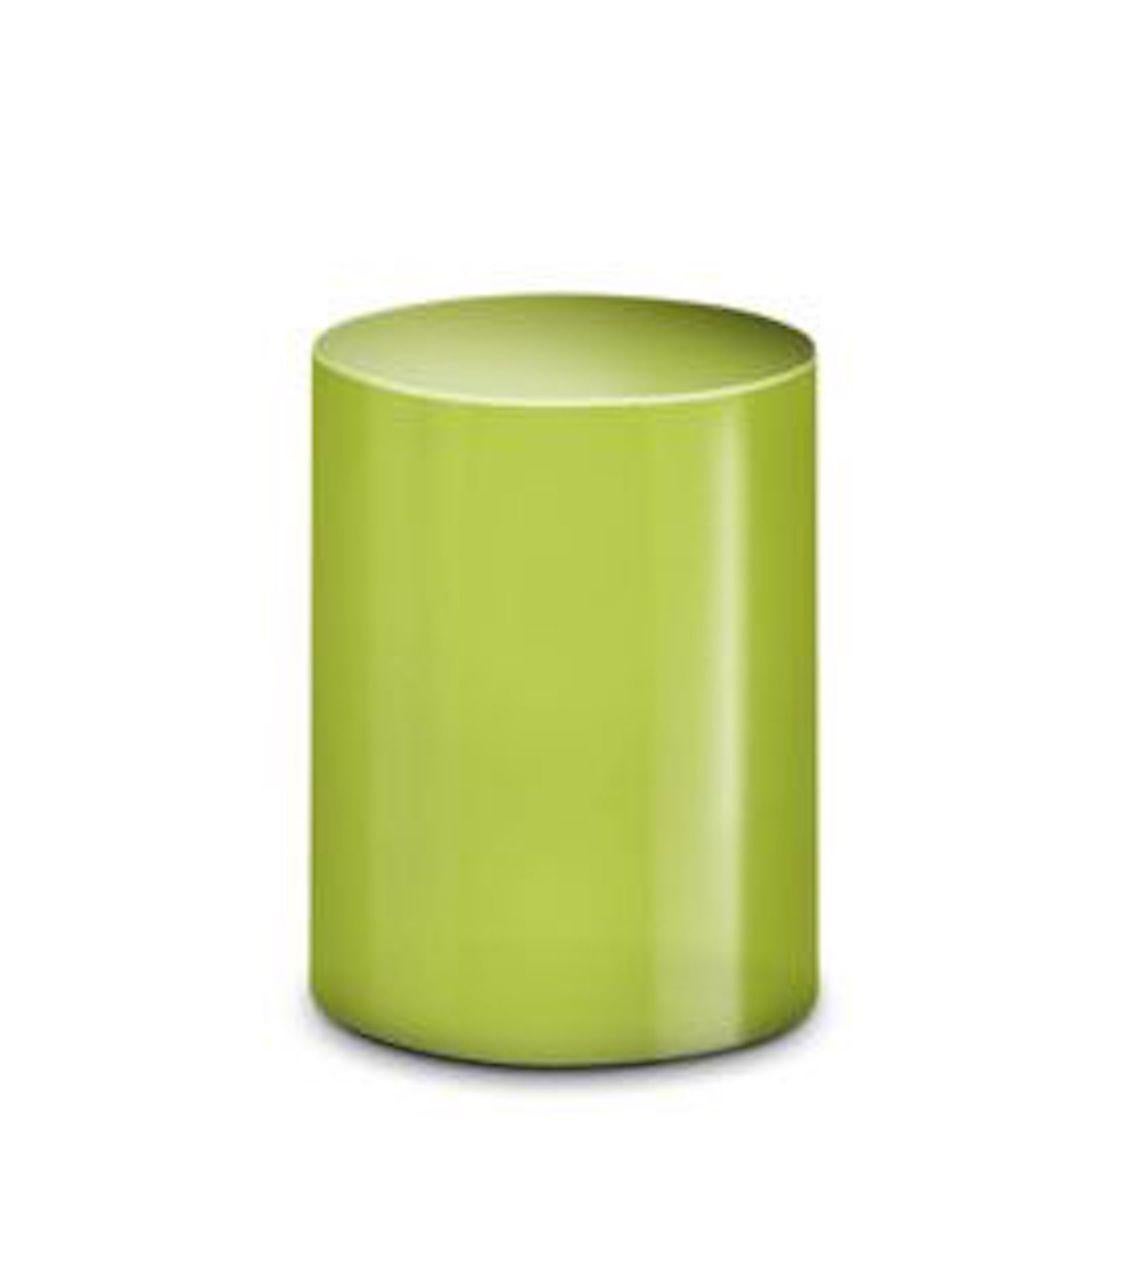 The  Rio’s simple, cylindrical shape is handcrafted in an array of different finishes, each giving  a distinctive personality. These versatile all lacquered versions, shown here with a wood top, make a stylish statement.  


*Pictured here in a